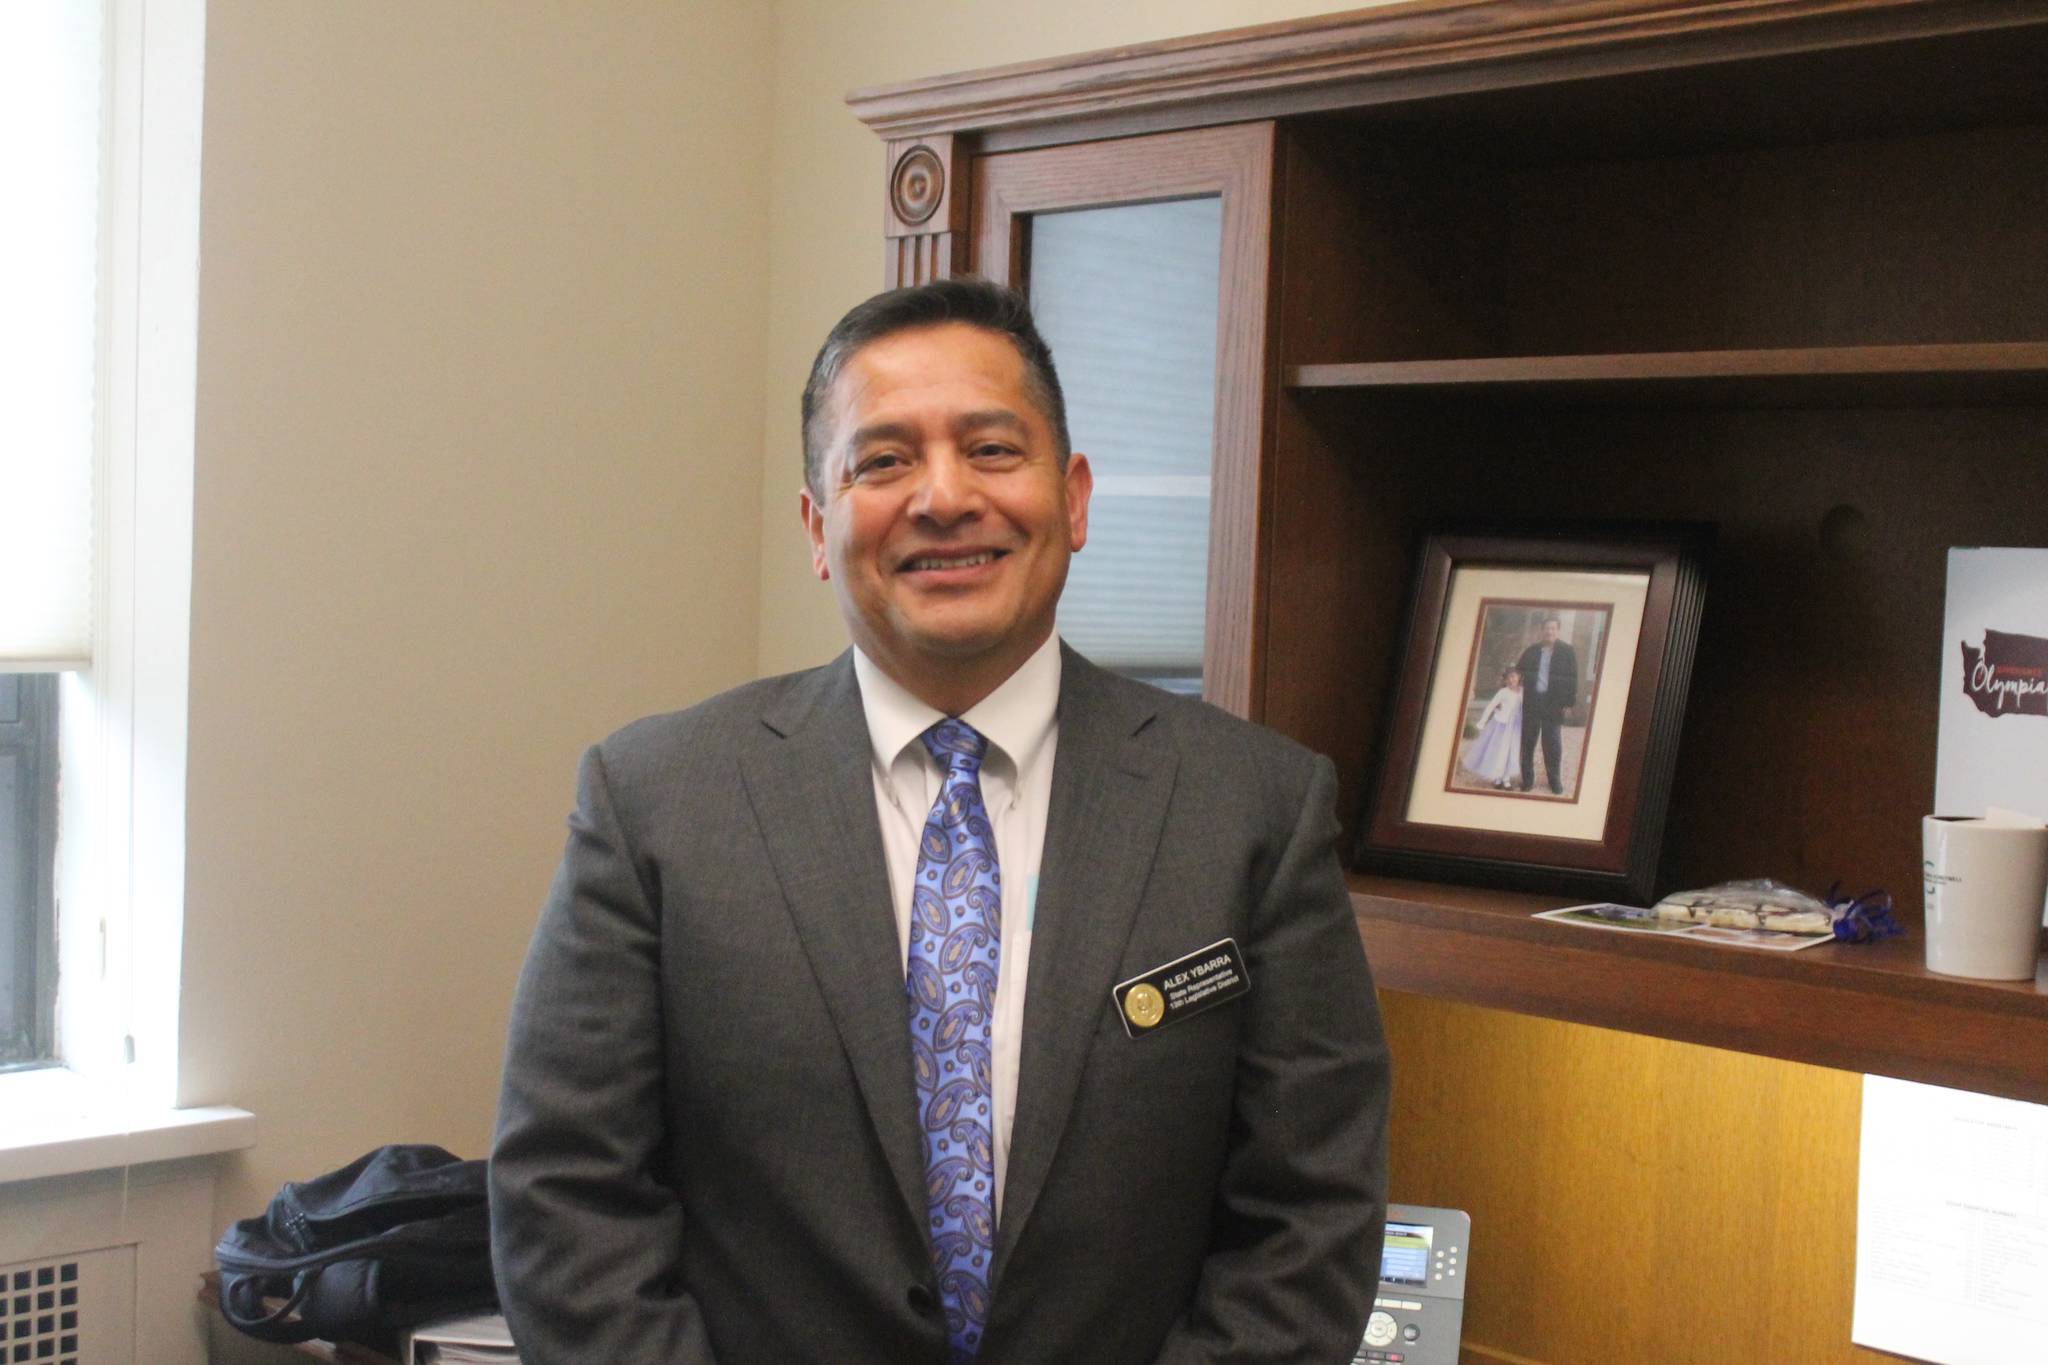 Halfway through his first legislative session Ybarra plans to run for re-election